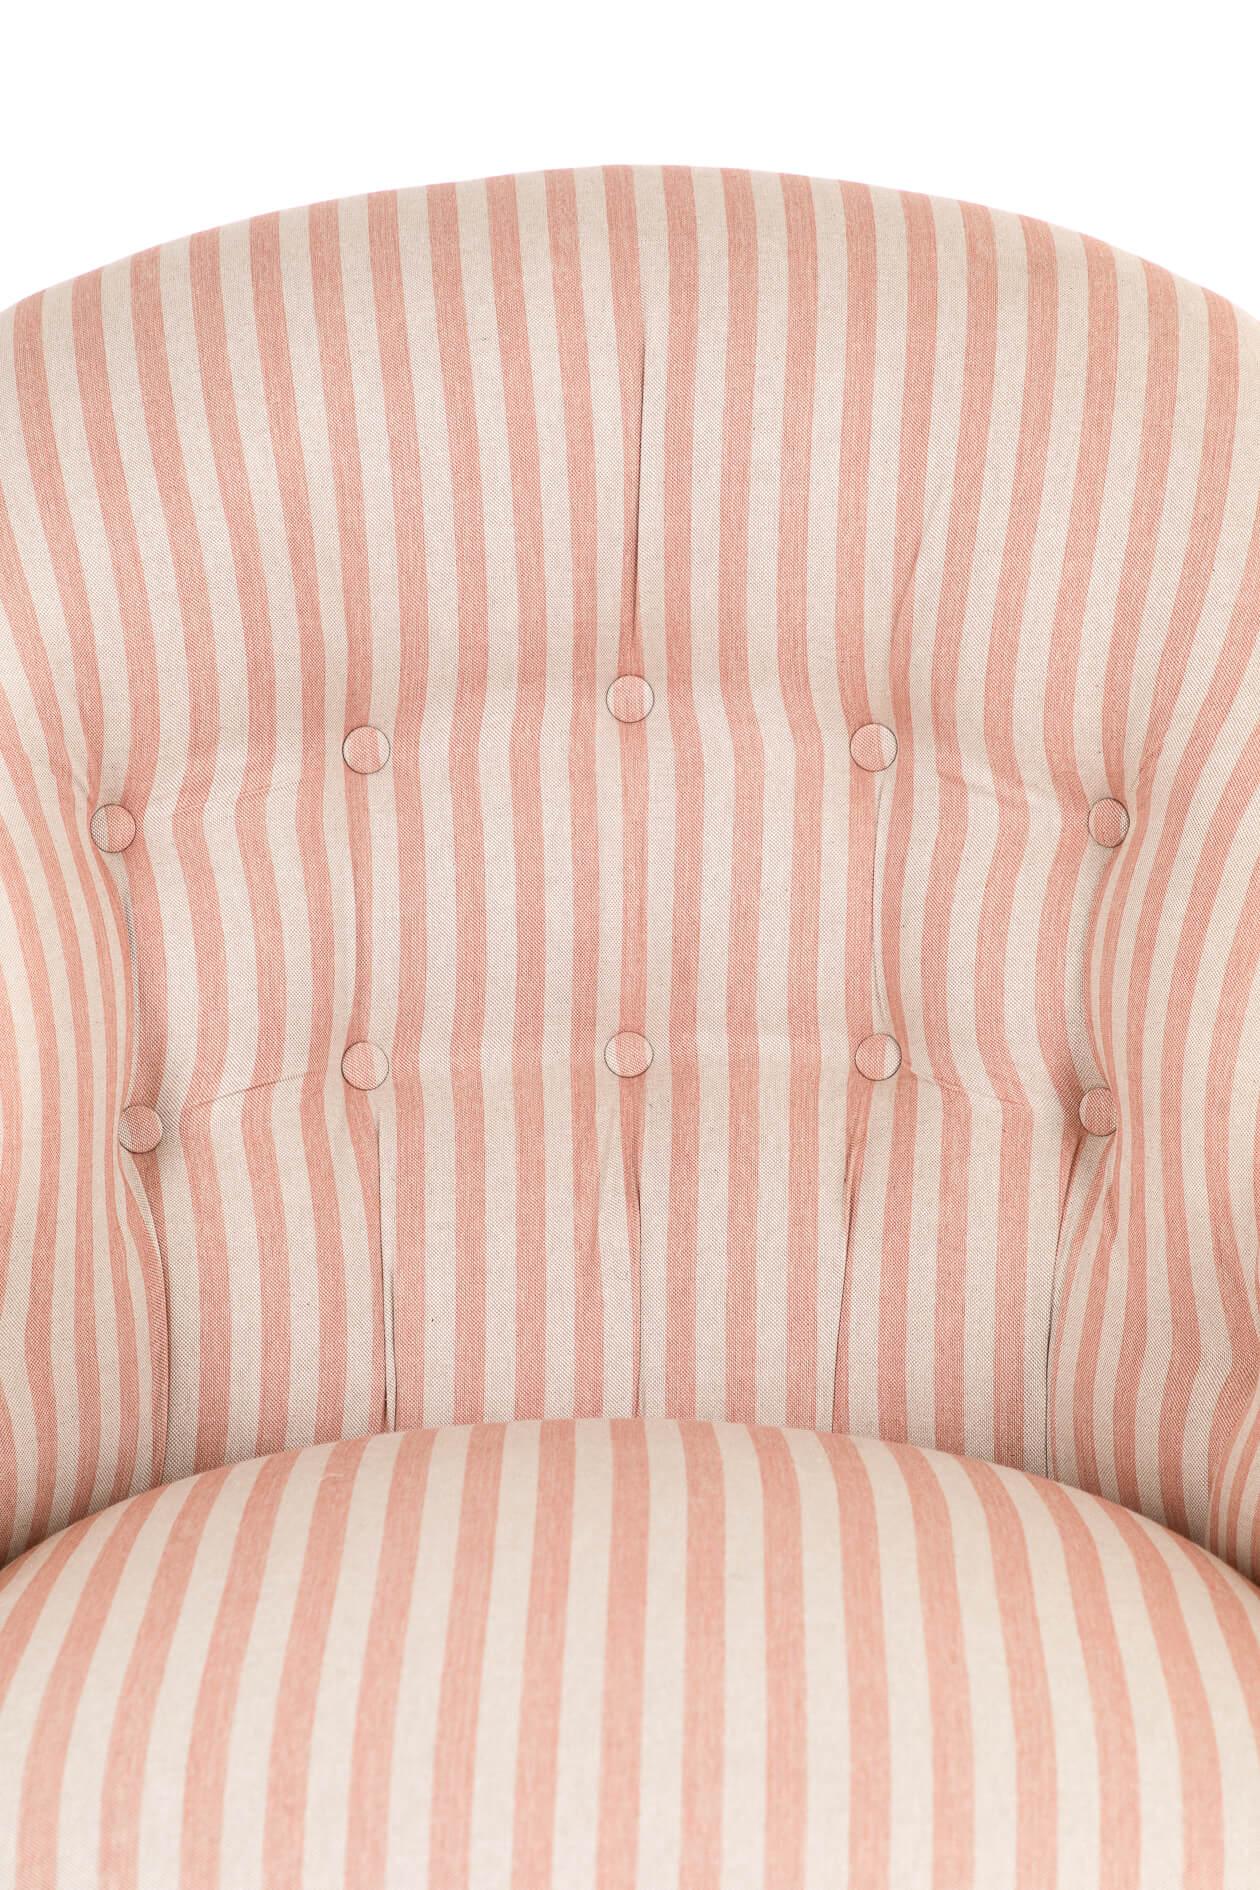 Victorian Pink Stripe Button Back Armchair In Good Condition For Sale In Faversham, GB